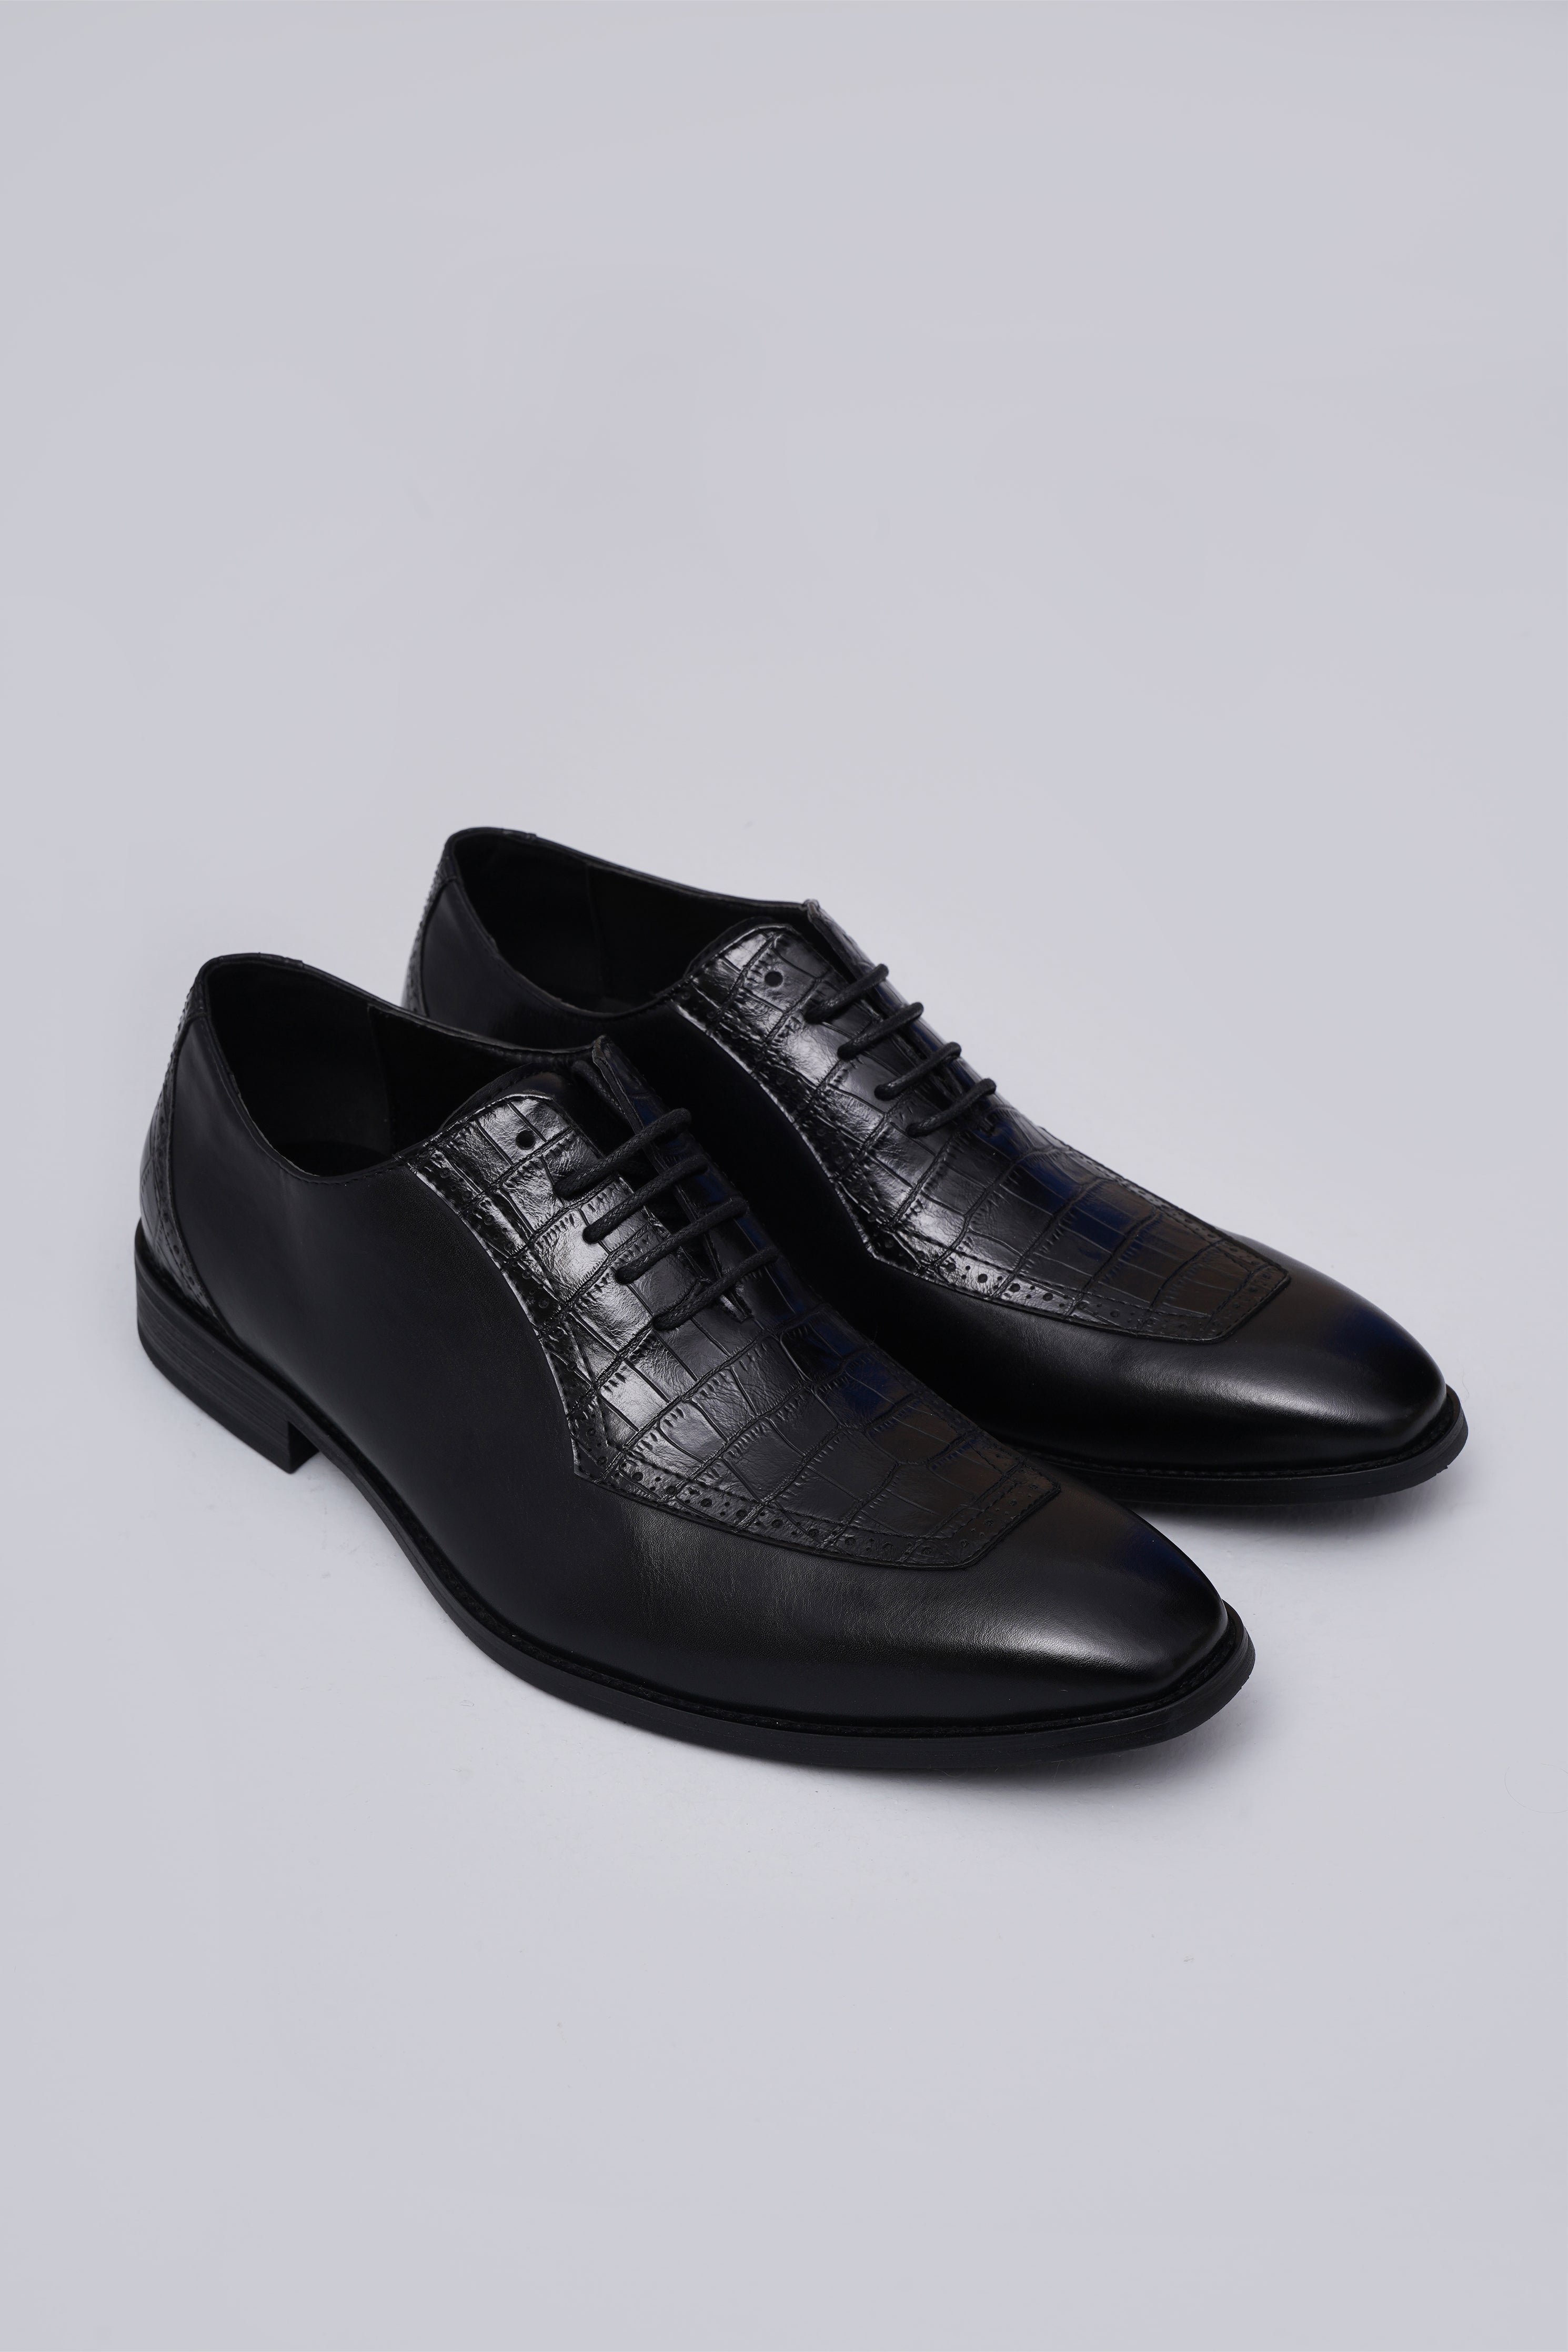 BLACK TEXURED LACE UP SHOES